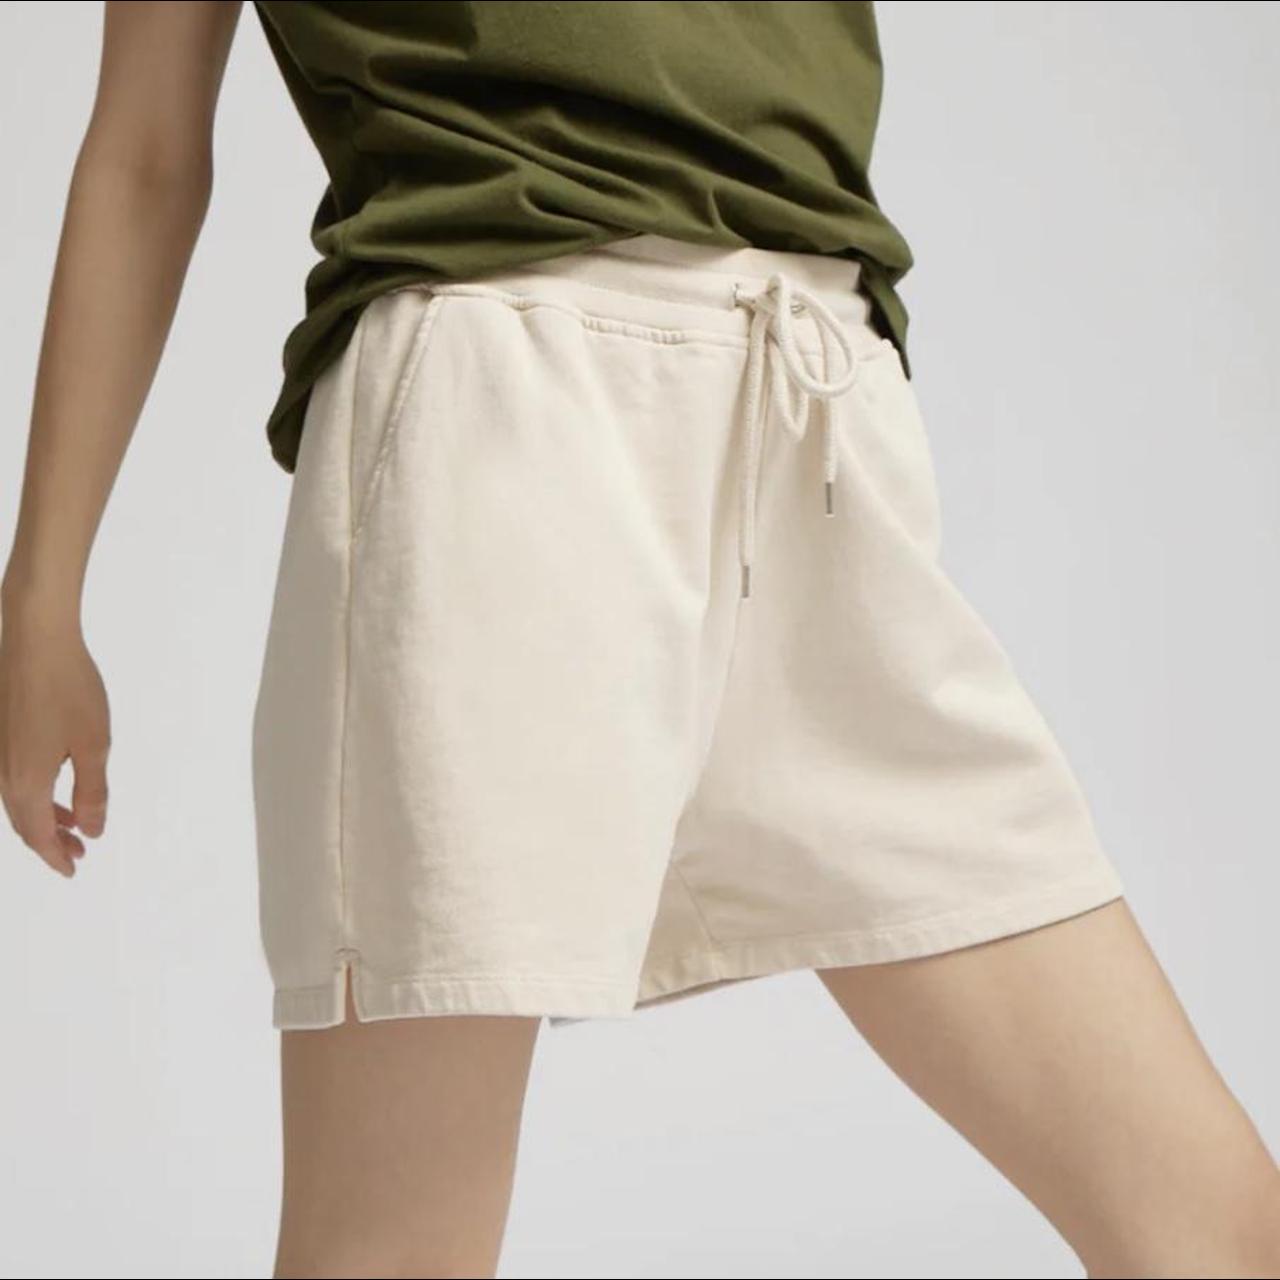 Colorful Standard Women's Cream and White Shorts (2)